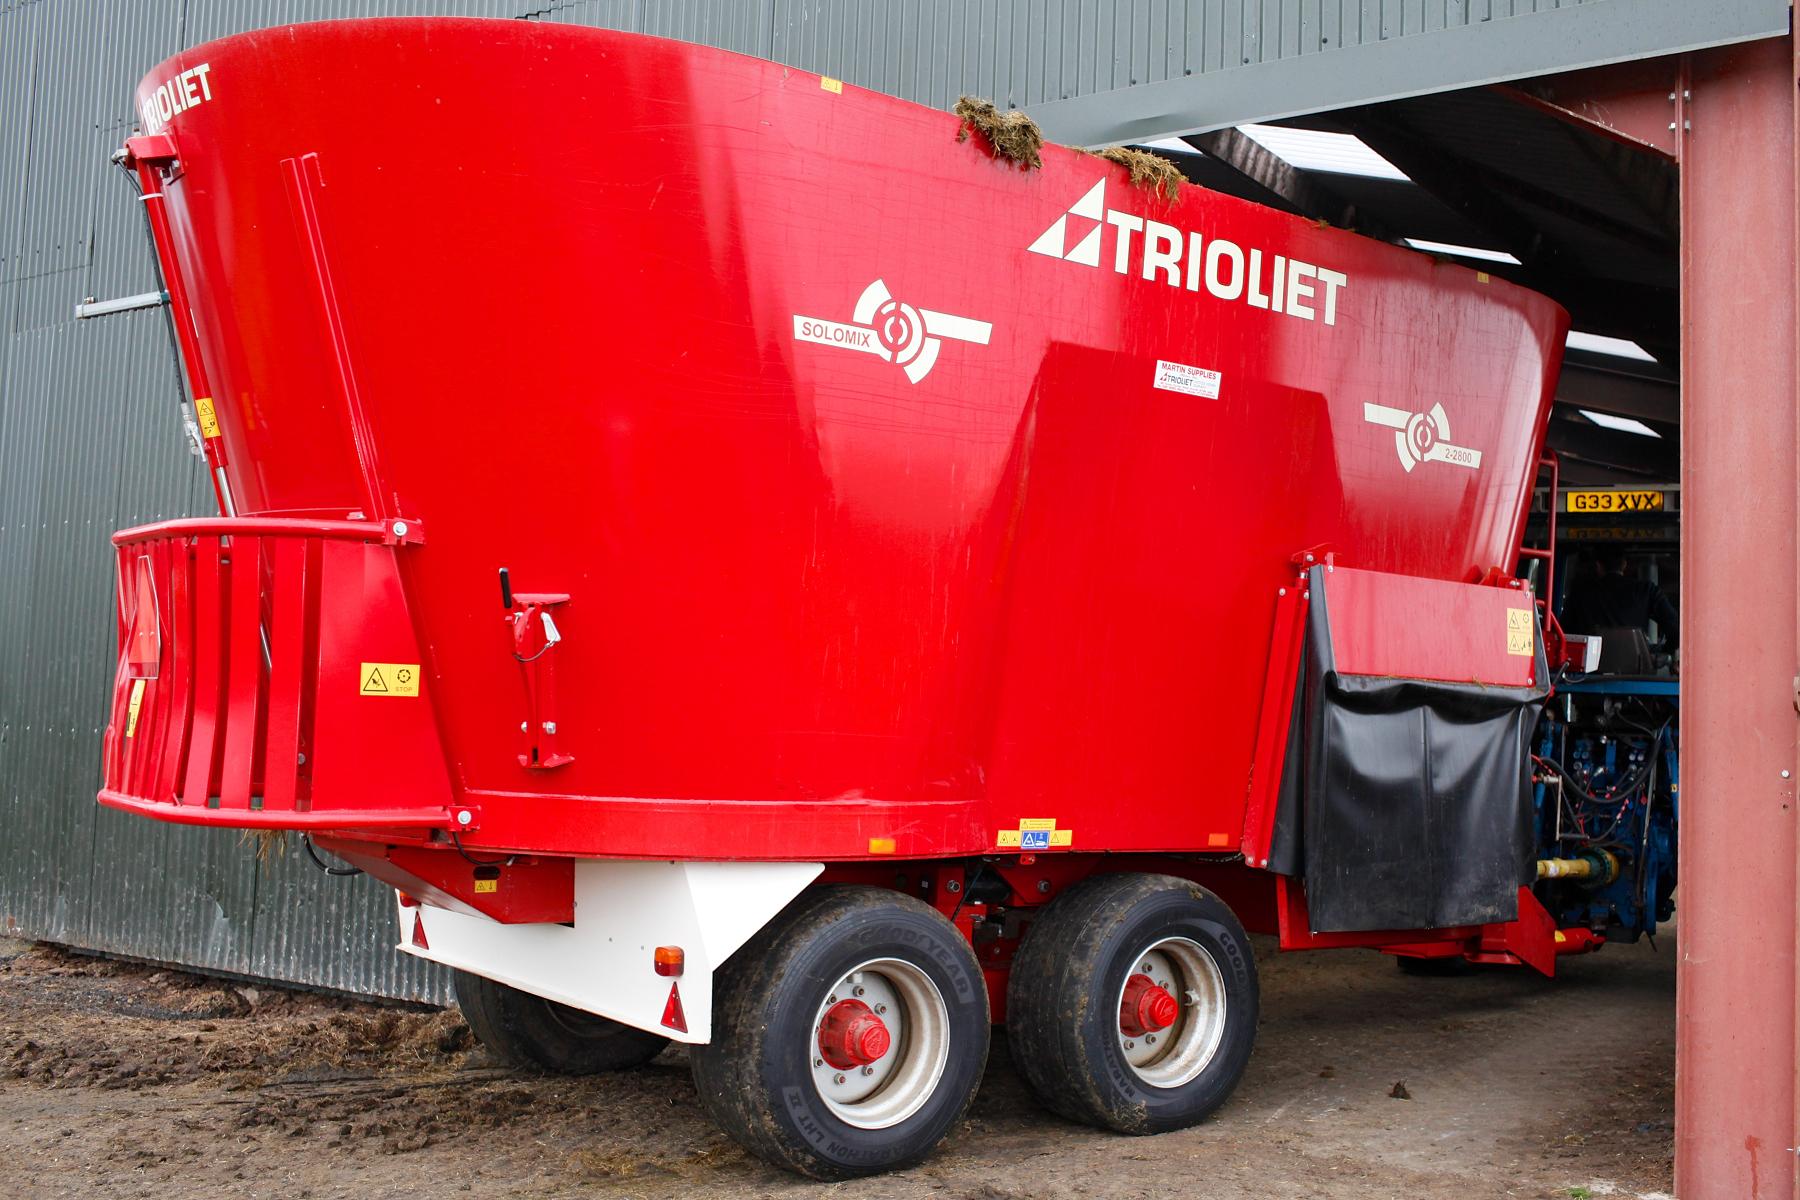 These-twin-auger-feed-mixers-are-the-best-for-dairy-farmers